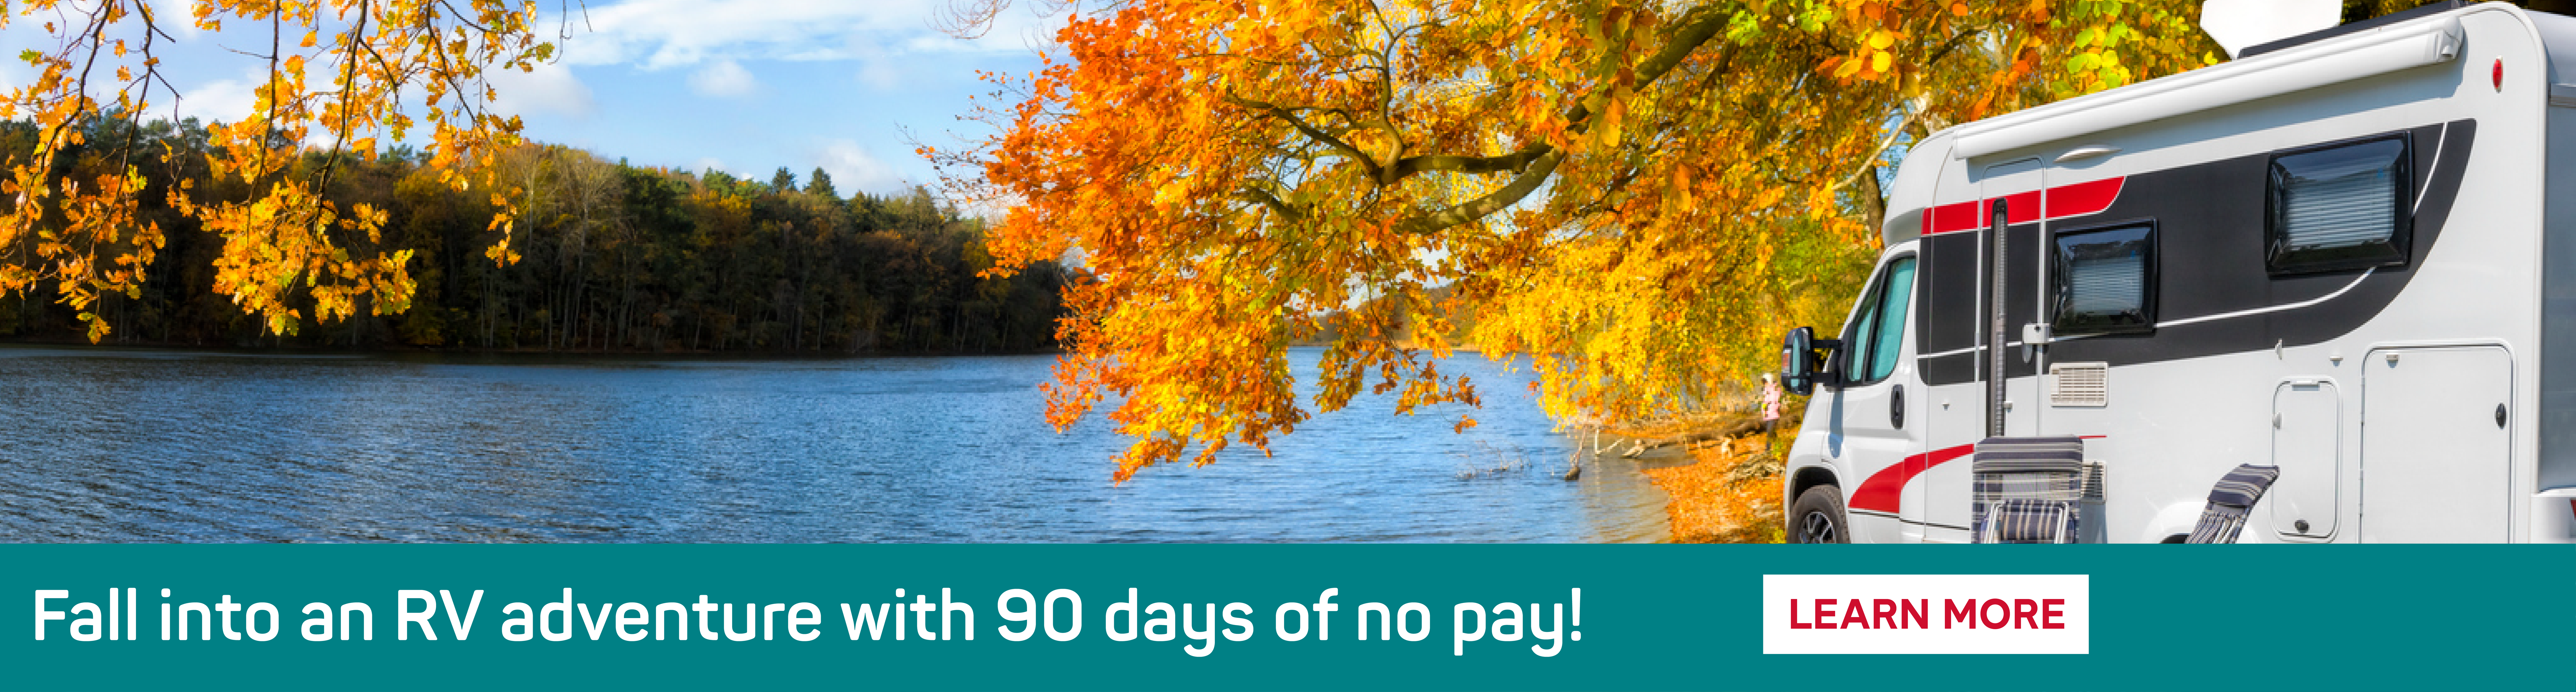 Make no payments for 90 days on Recreational Vehicle Loans!